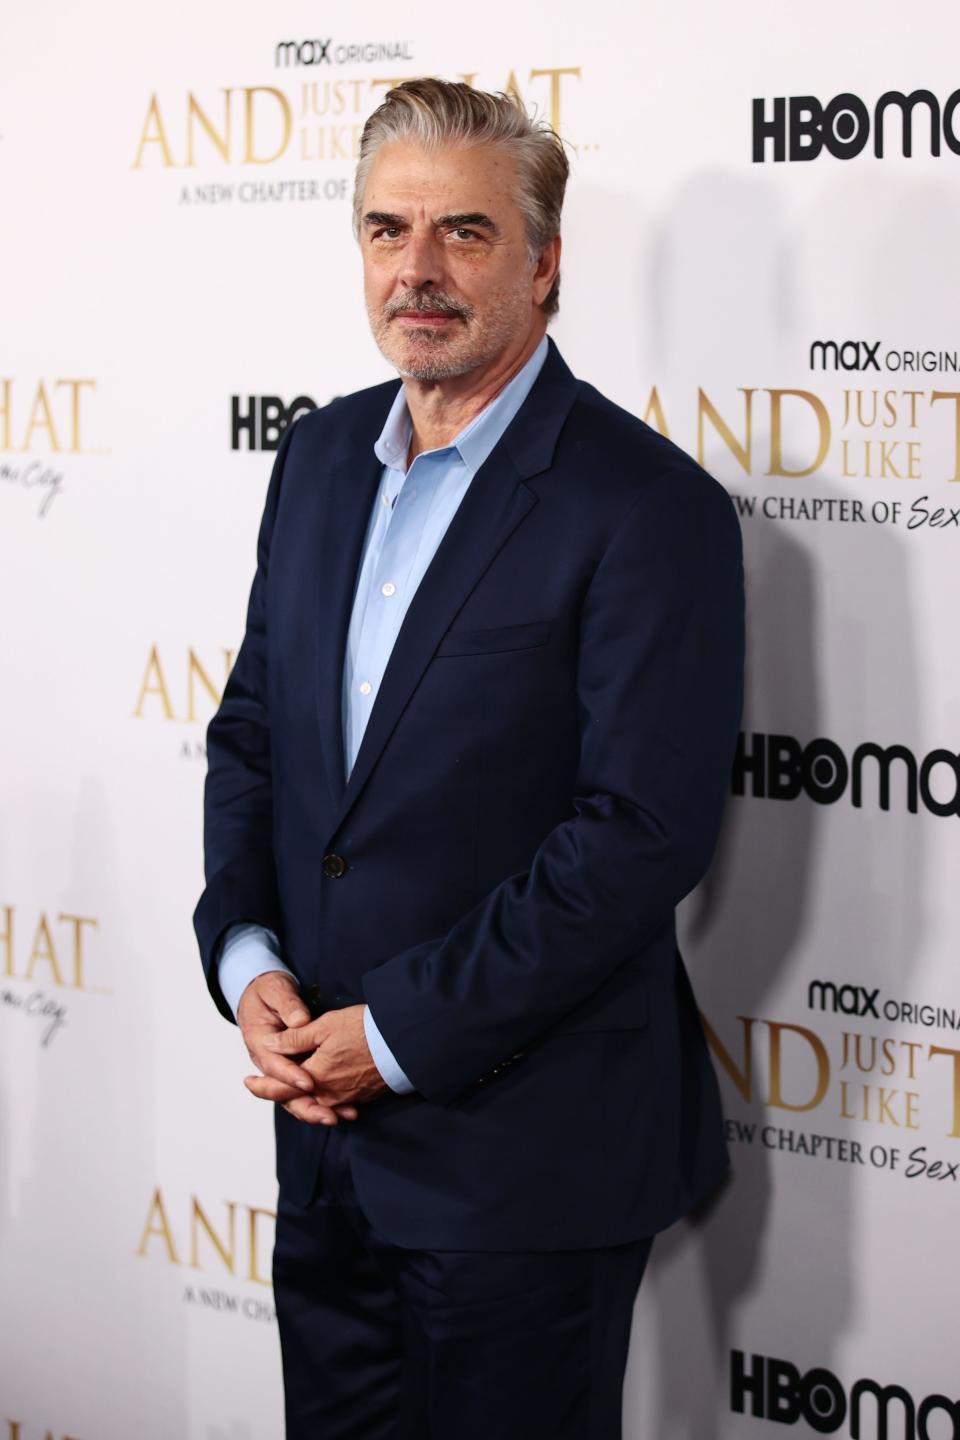 Chris Noth attends HBO Max's premiere of "And Just Like That" at Museum of Modern Art on December 08, 2021 in New York City.